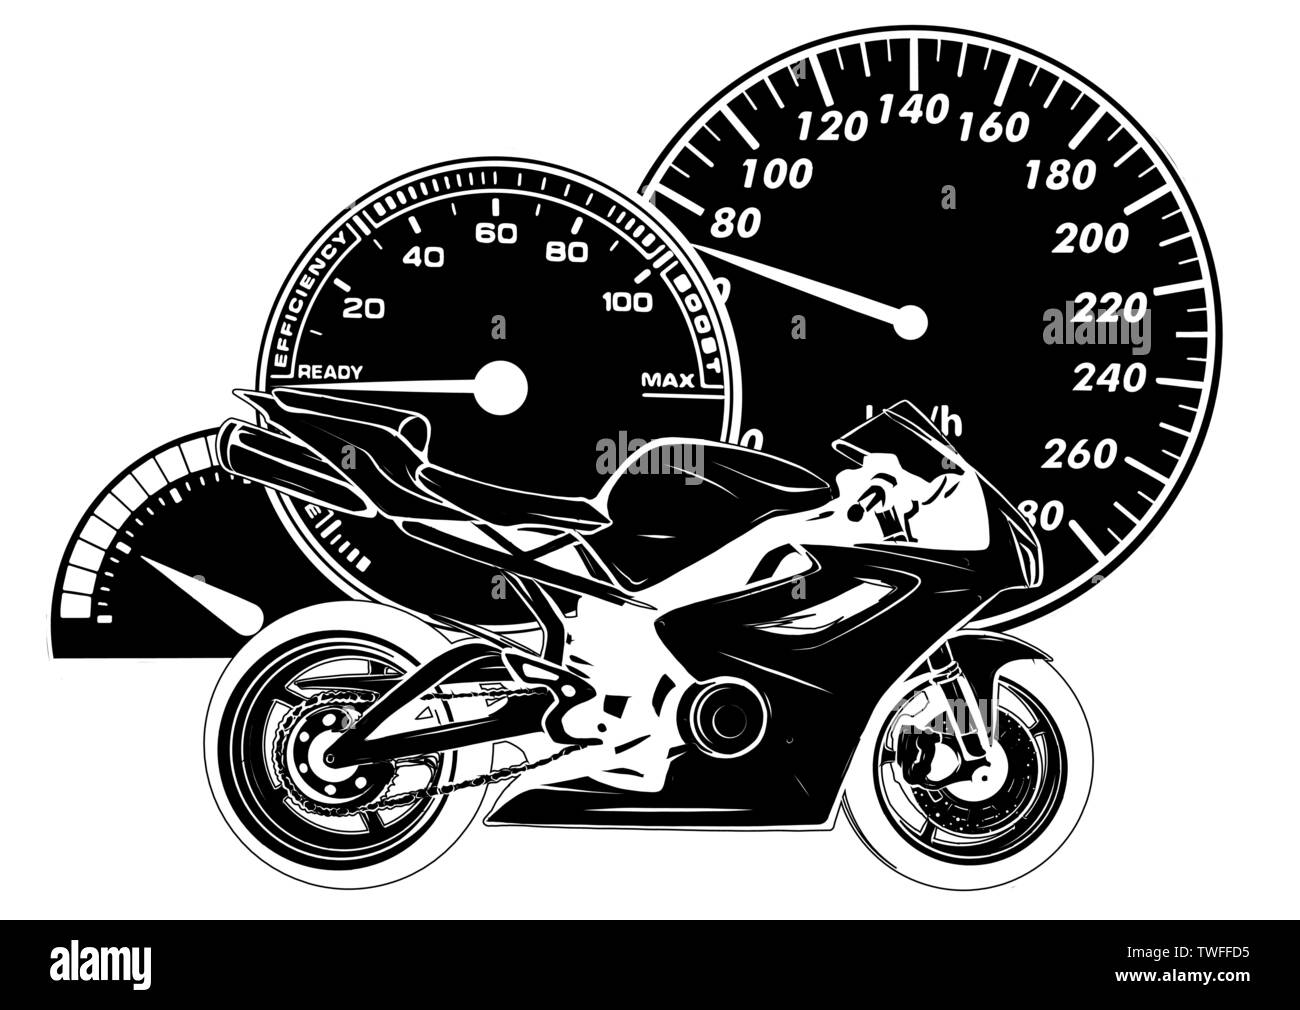 Artistic stylized motorcycle racer in motion. illustration Stock Vector